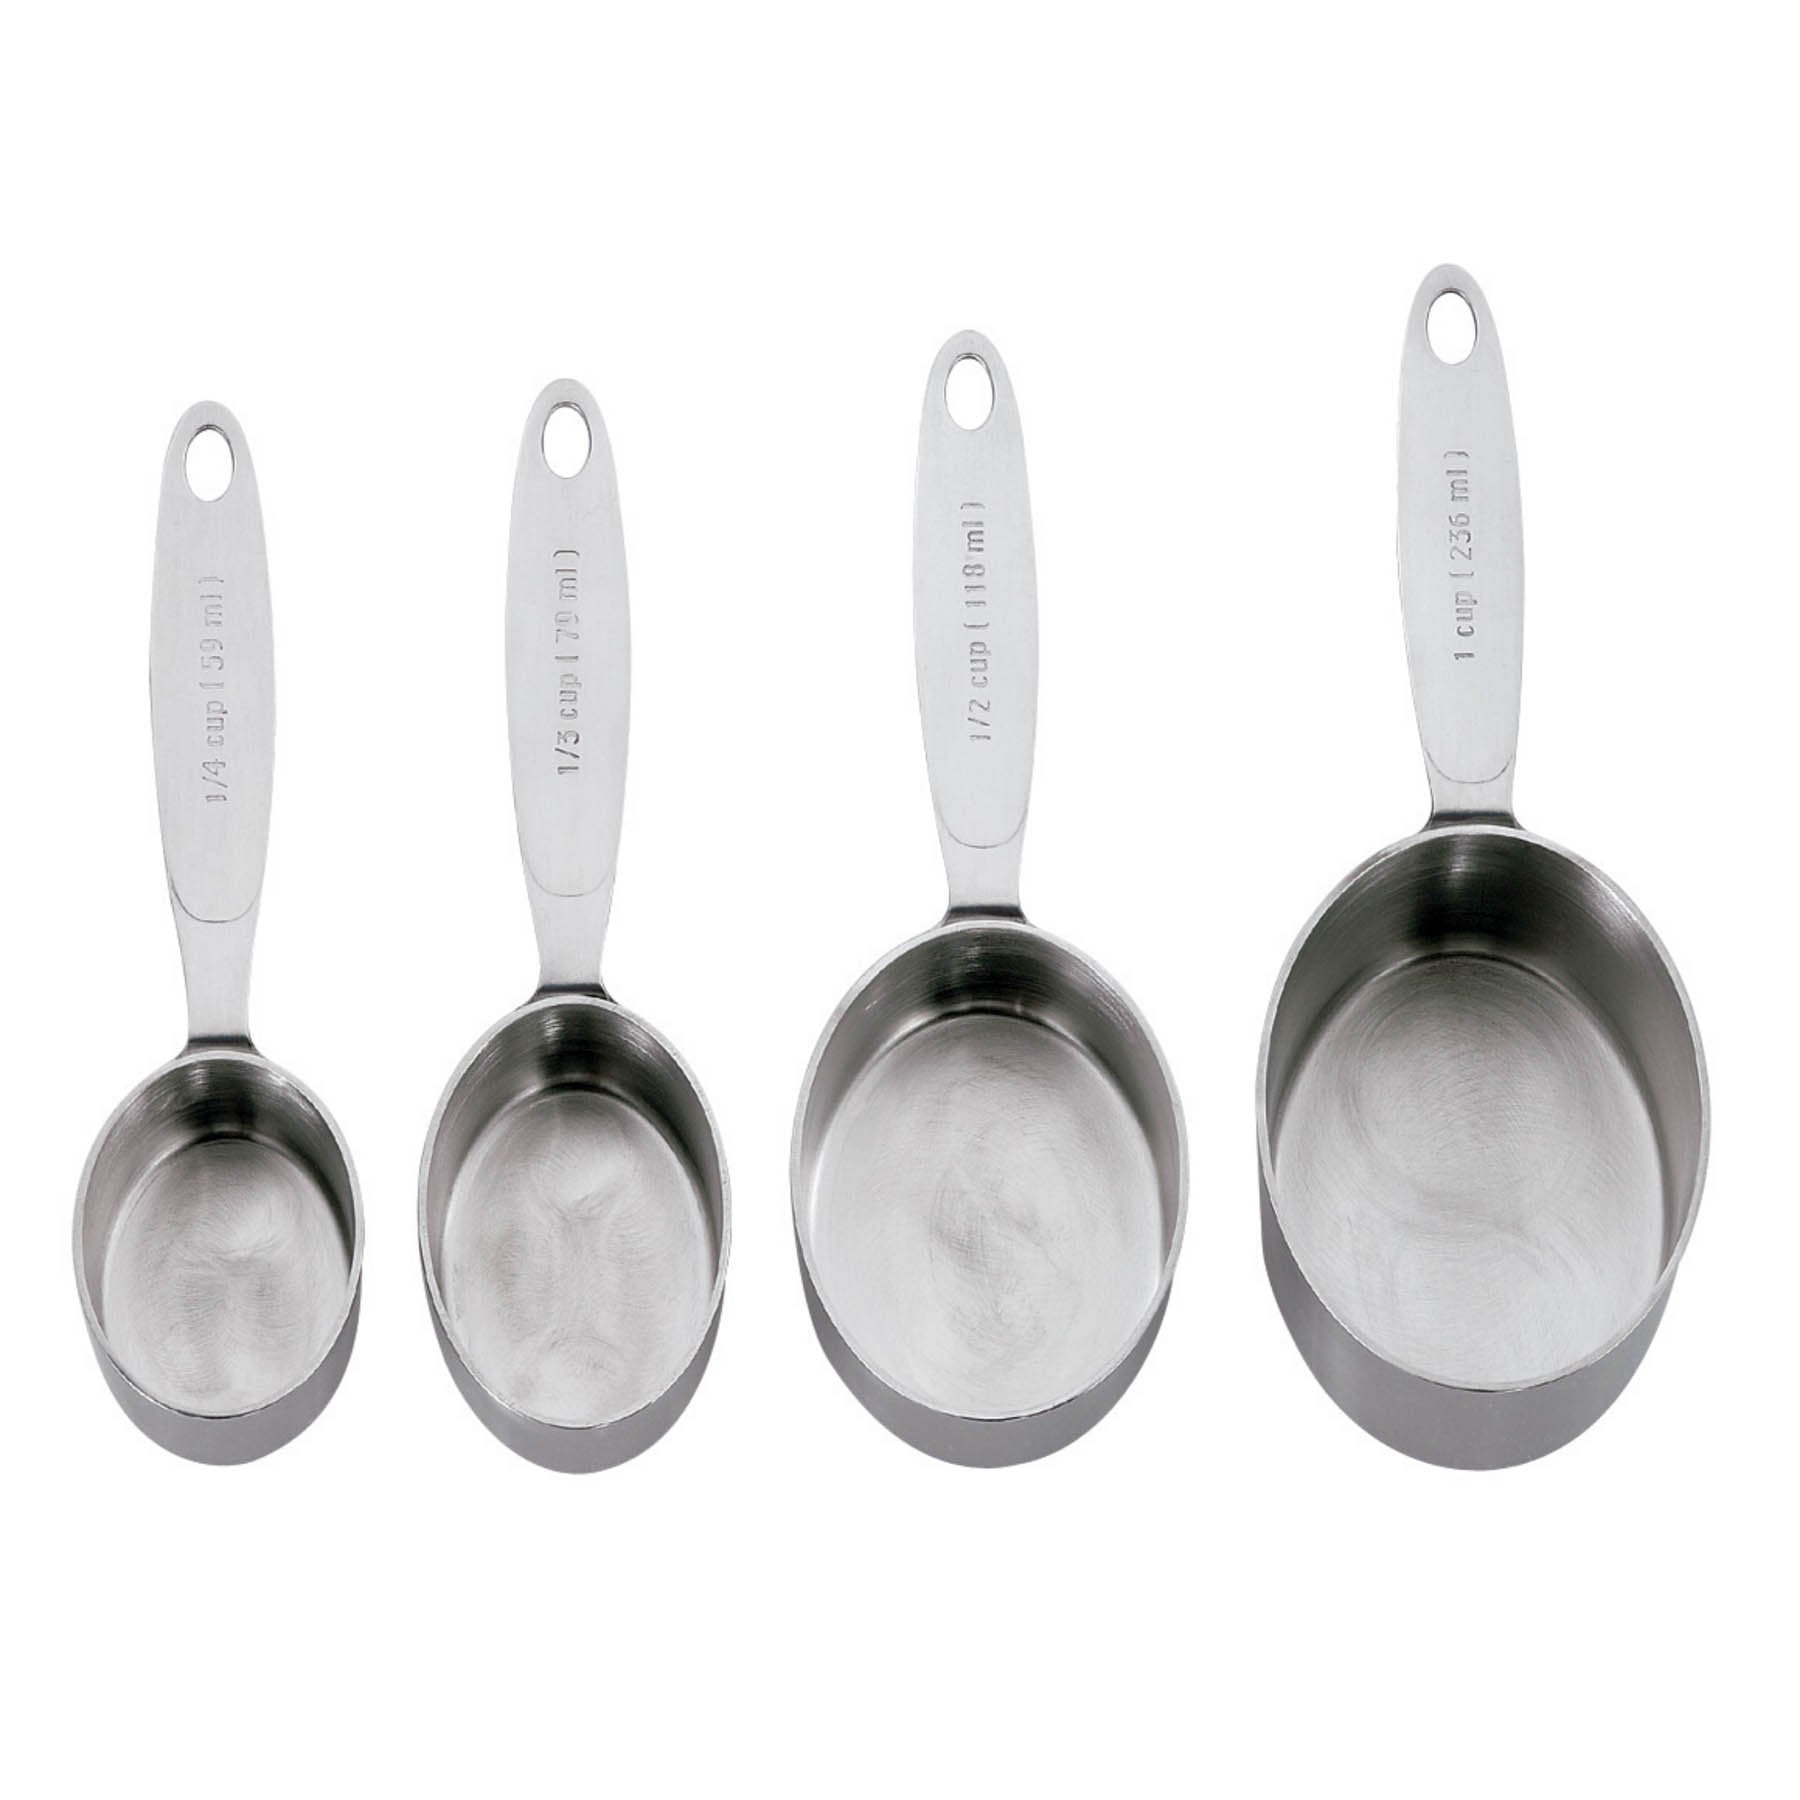 chefstyle Measuring Cup Set - Shop Utensils & Gadgets at H-E-B